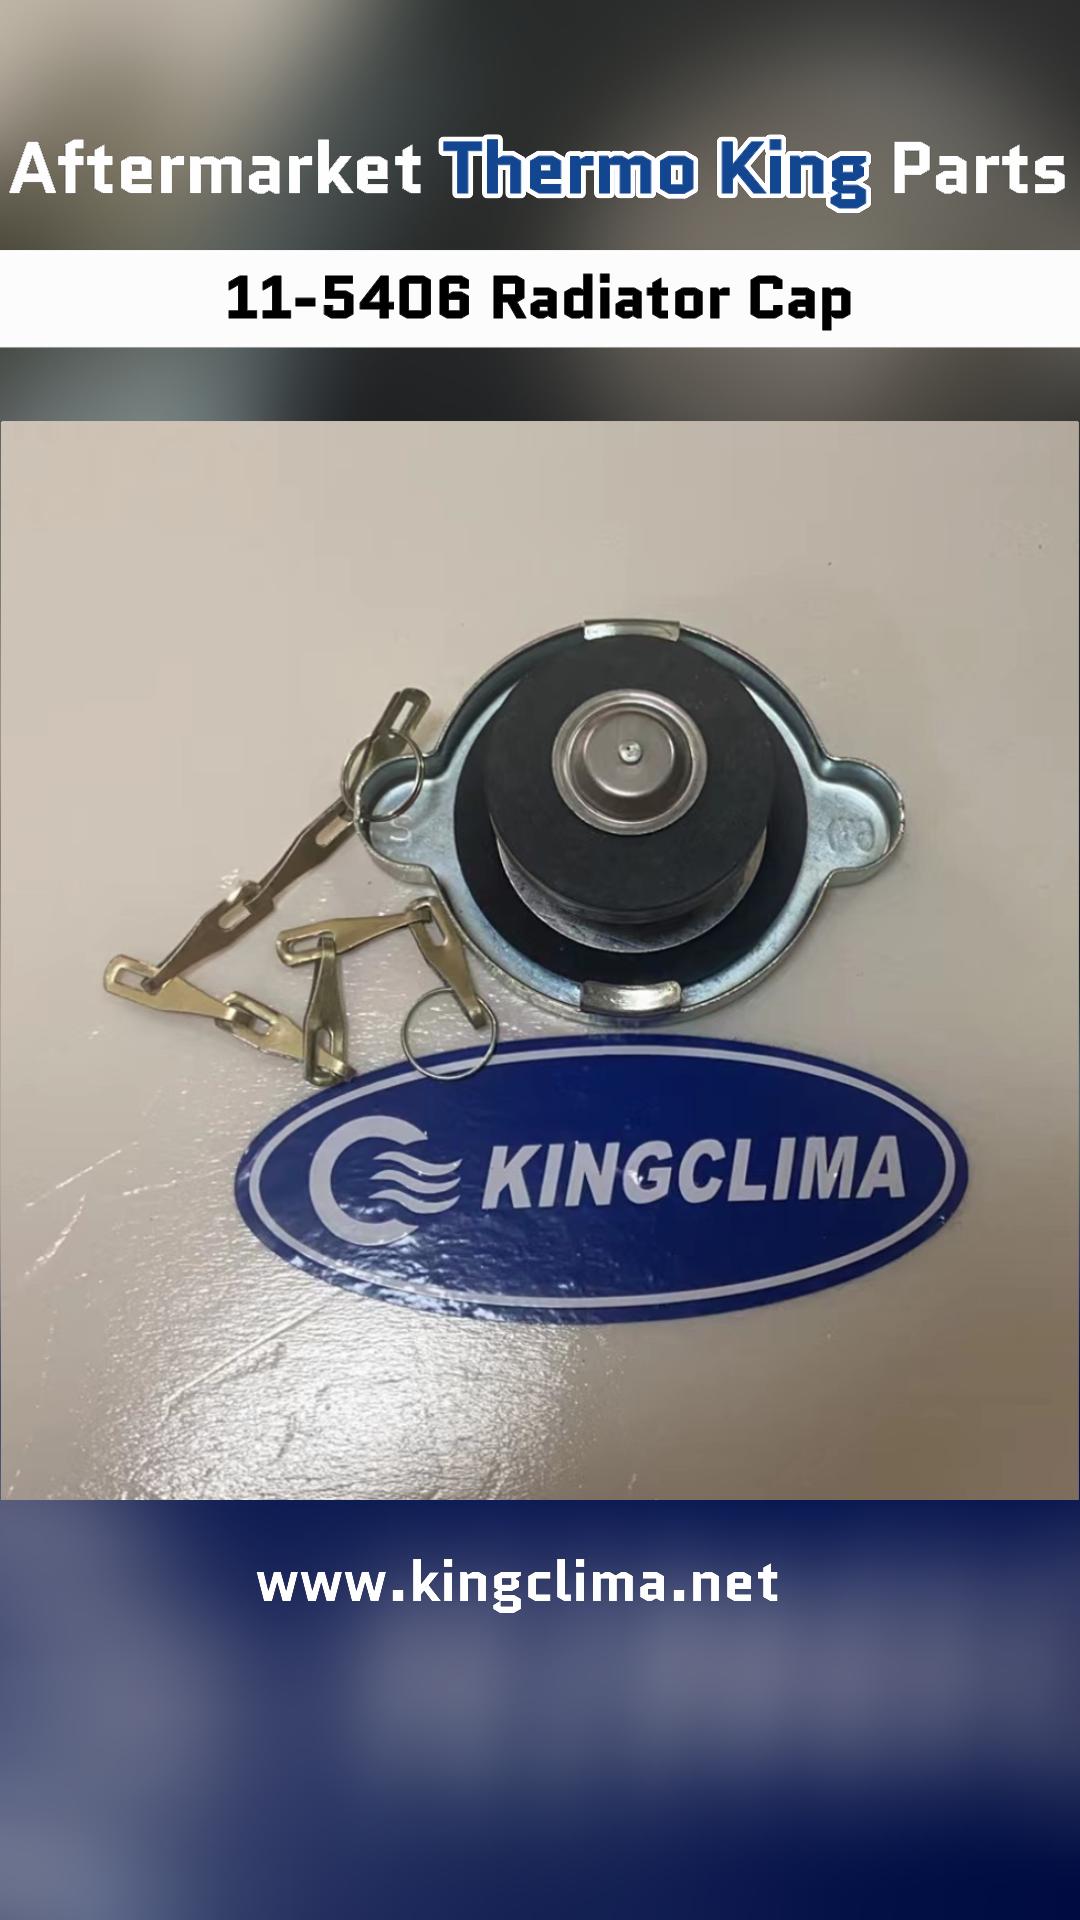 11-5406 Radiator Cap for Thermo King Refrigeration Parts